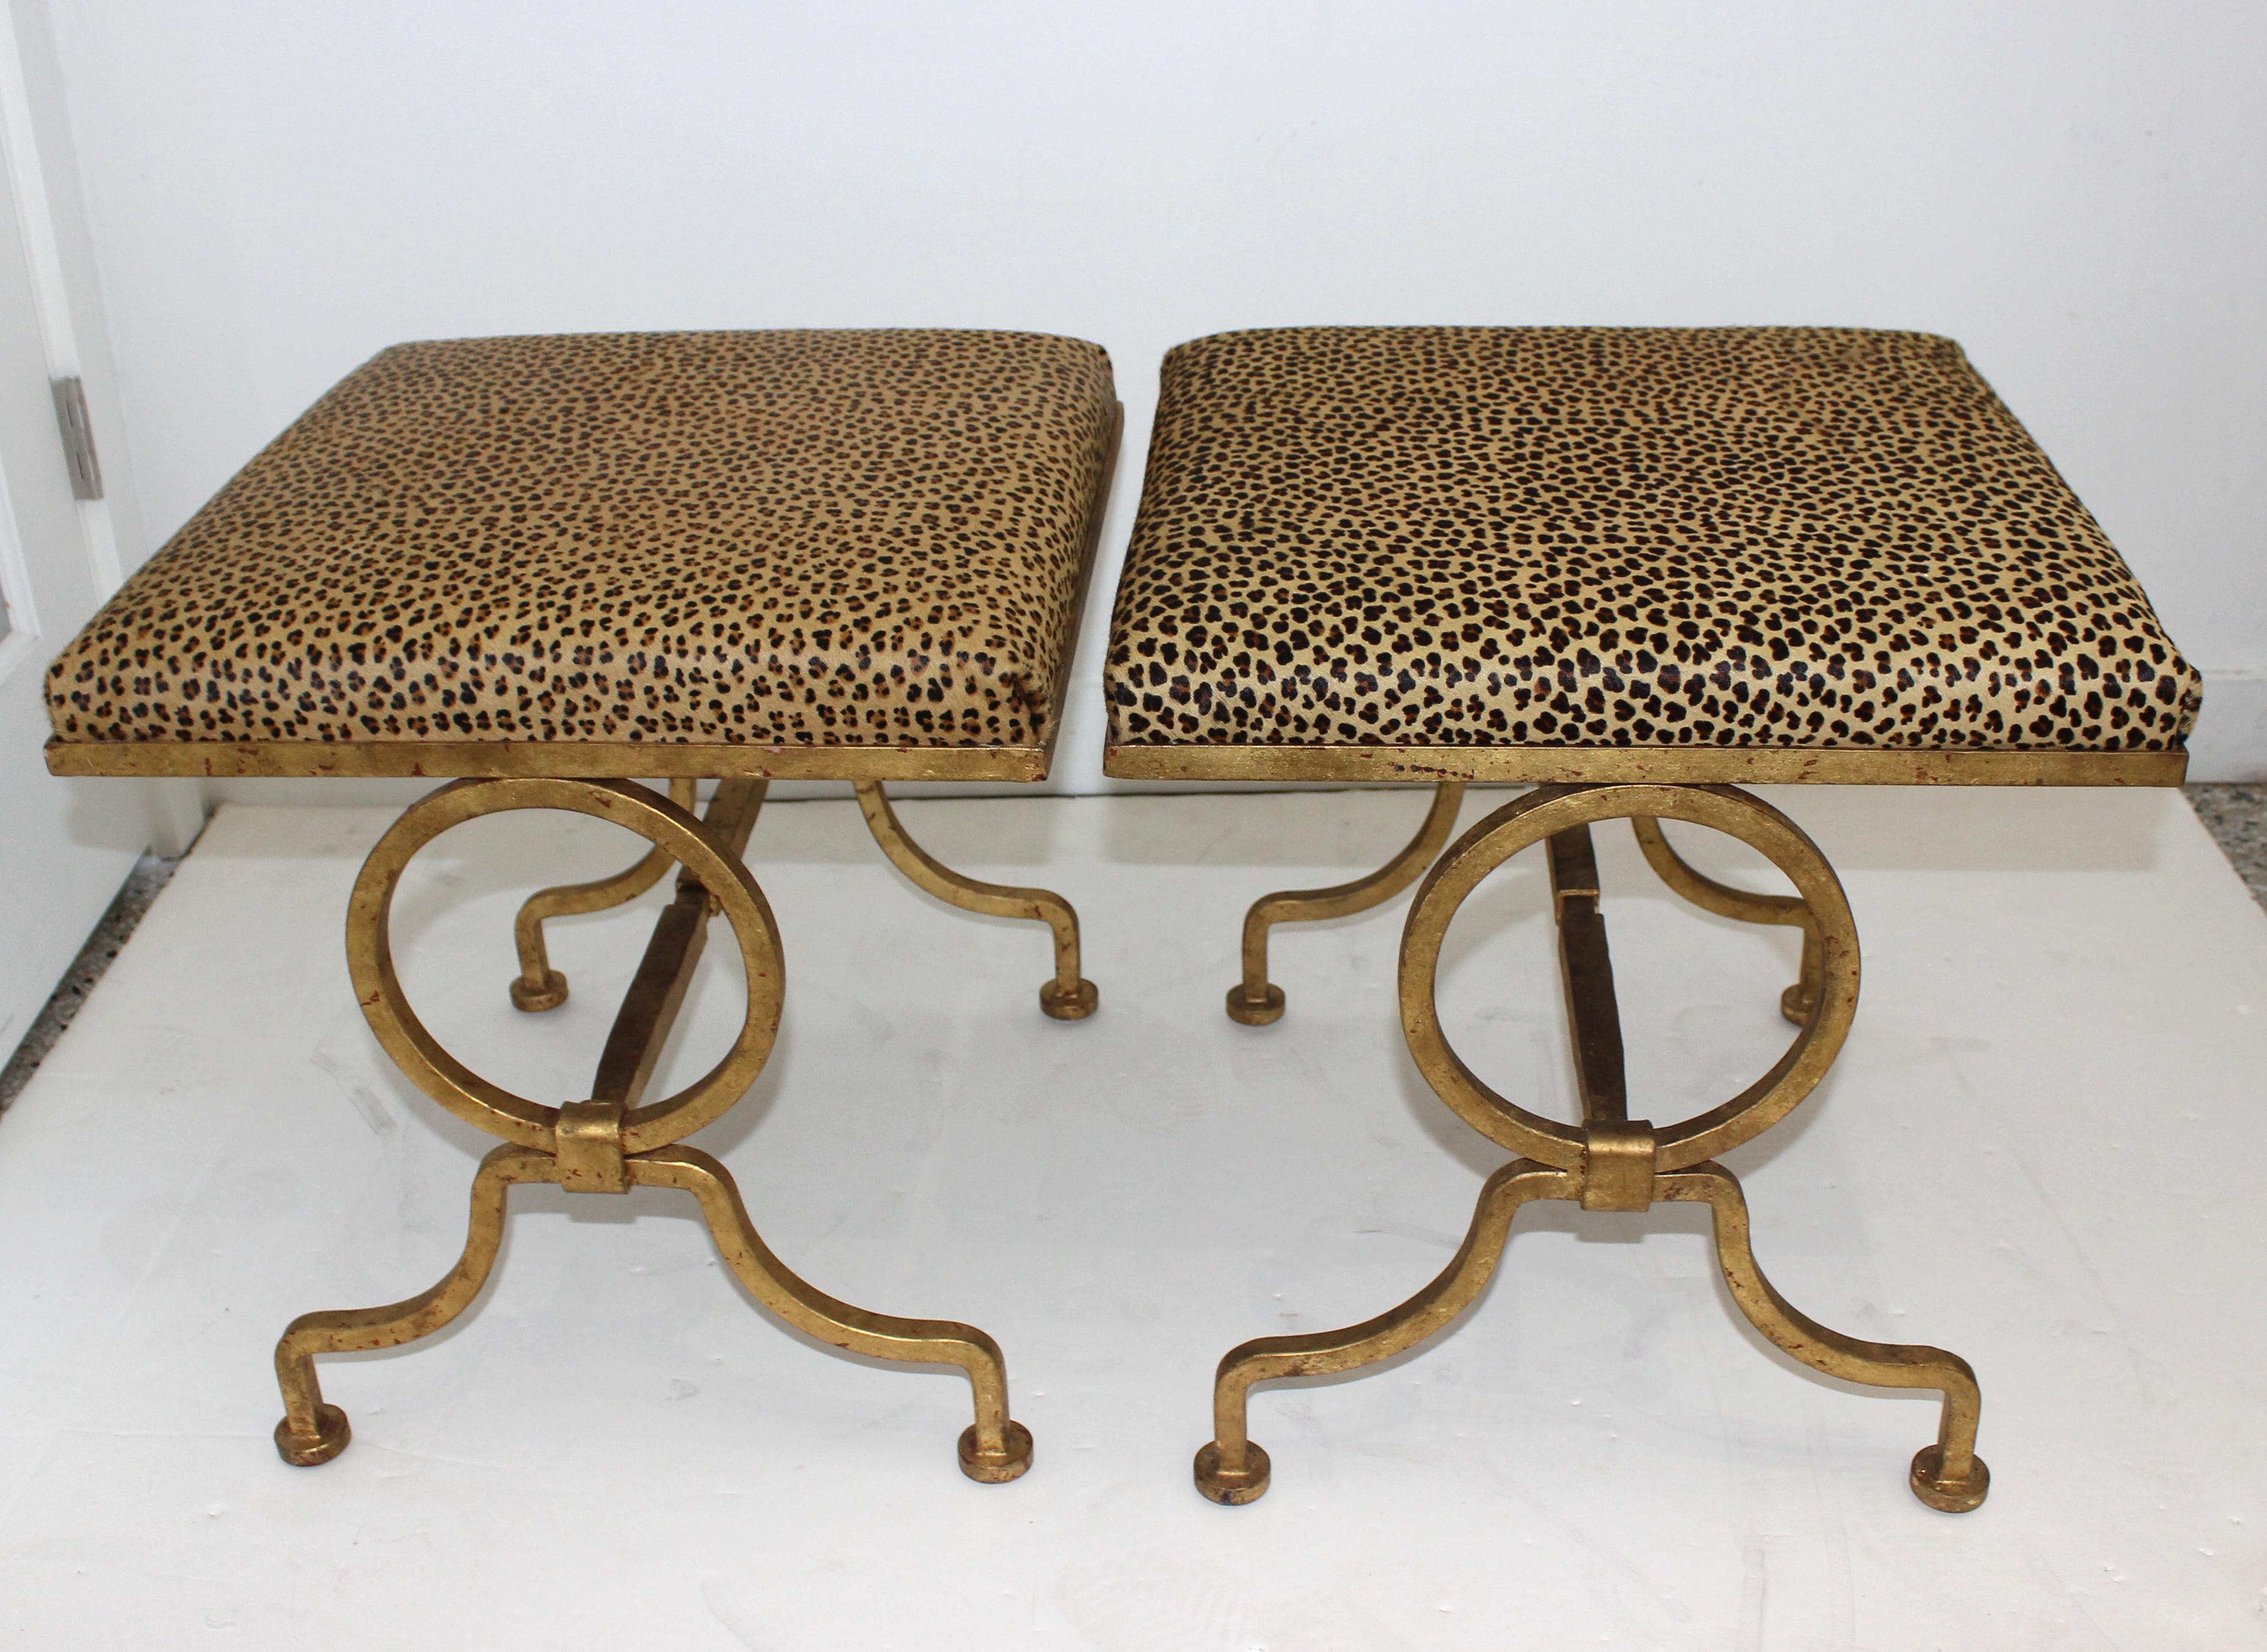 This stylish pair of stools date to the midcentury and are very much in the quality and style of pieces created by Andre Arbus. The faux leopard motif cow hide upholstery compliments the gilded metal finish.